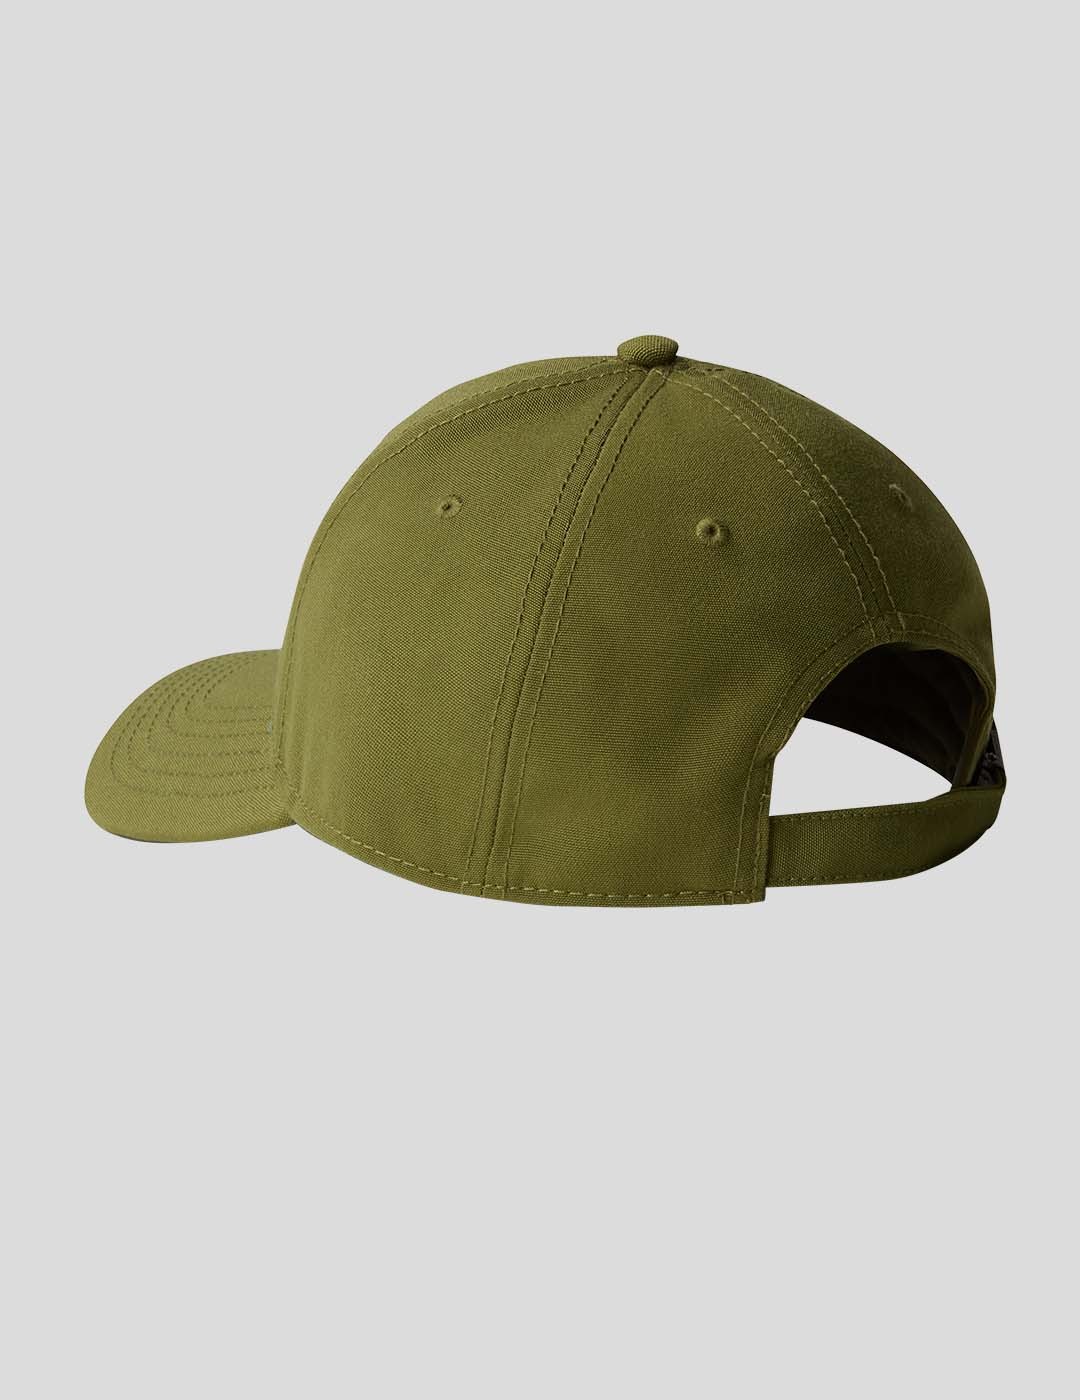 GORRA THE NORTH FACE RECYCLED 66 CLASSIC HAT  FOREST OLIVE